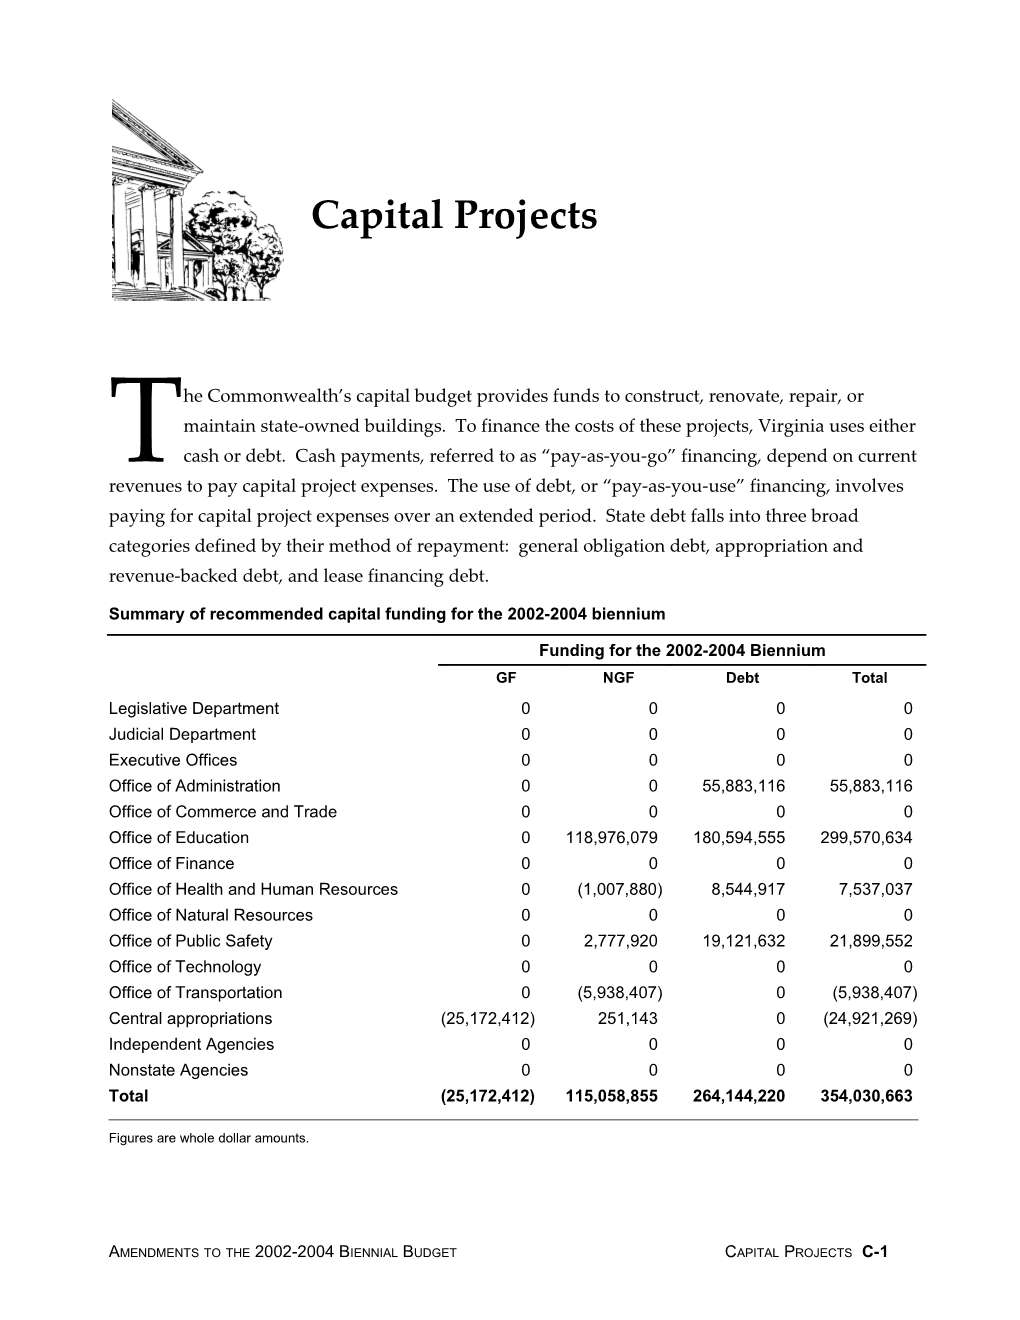 Summary of Recommended Capital Funding for the 2002-2004 Biennium